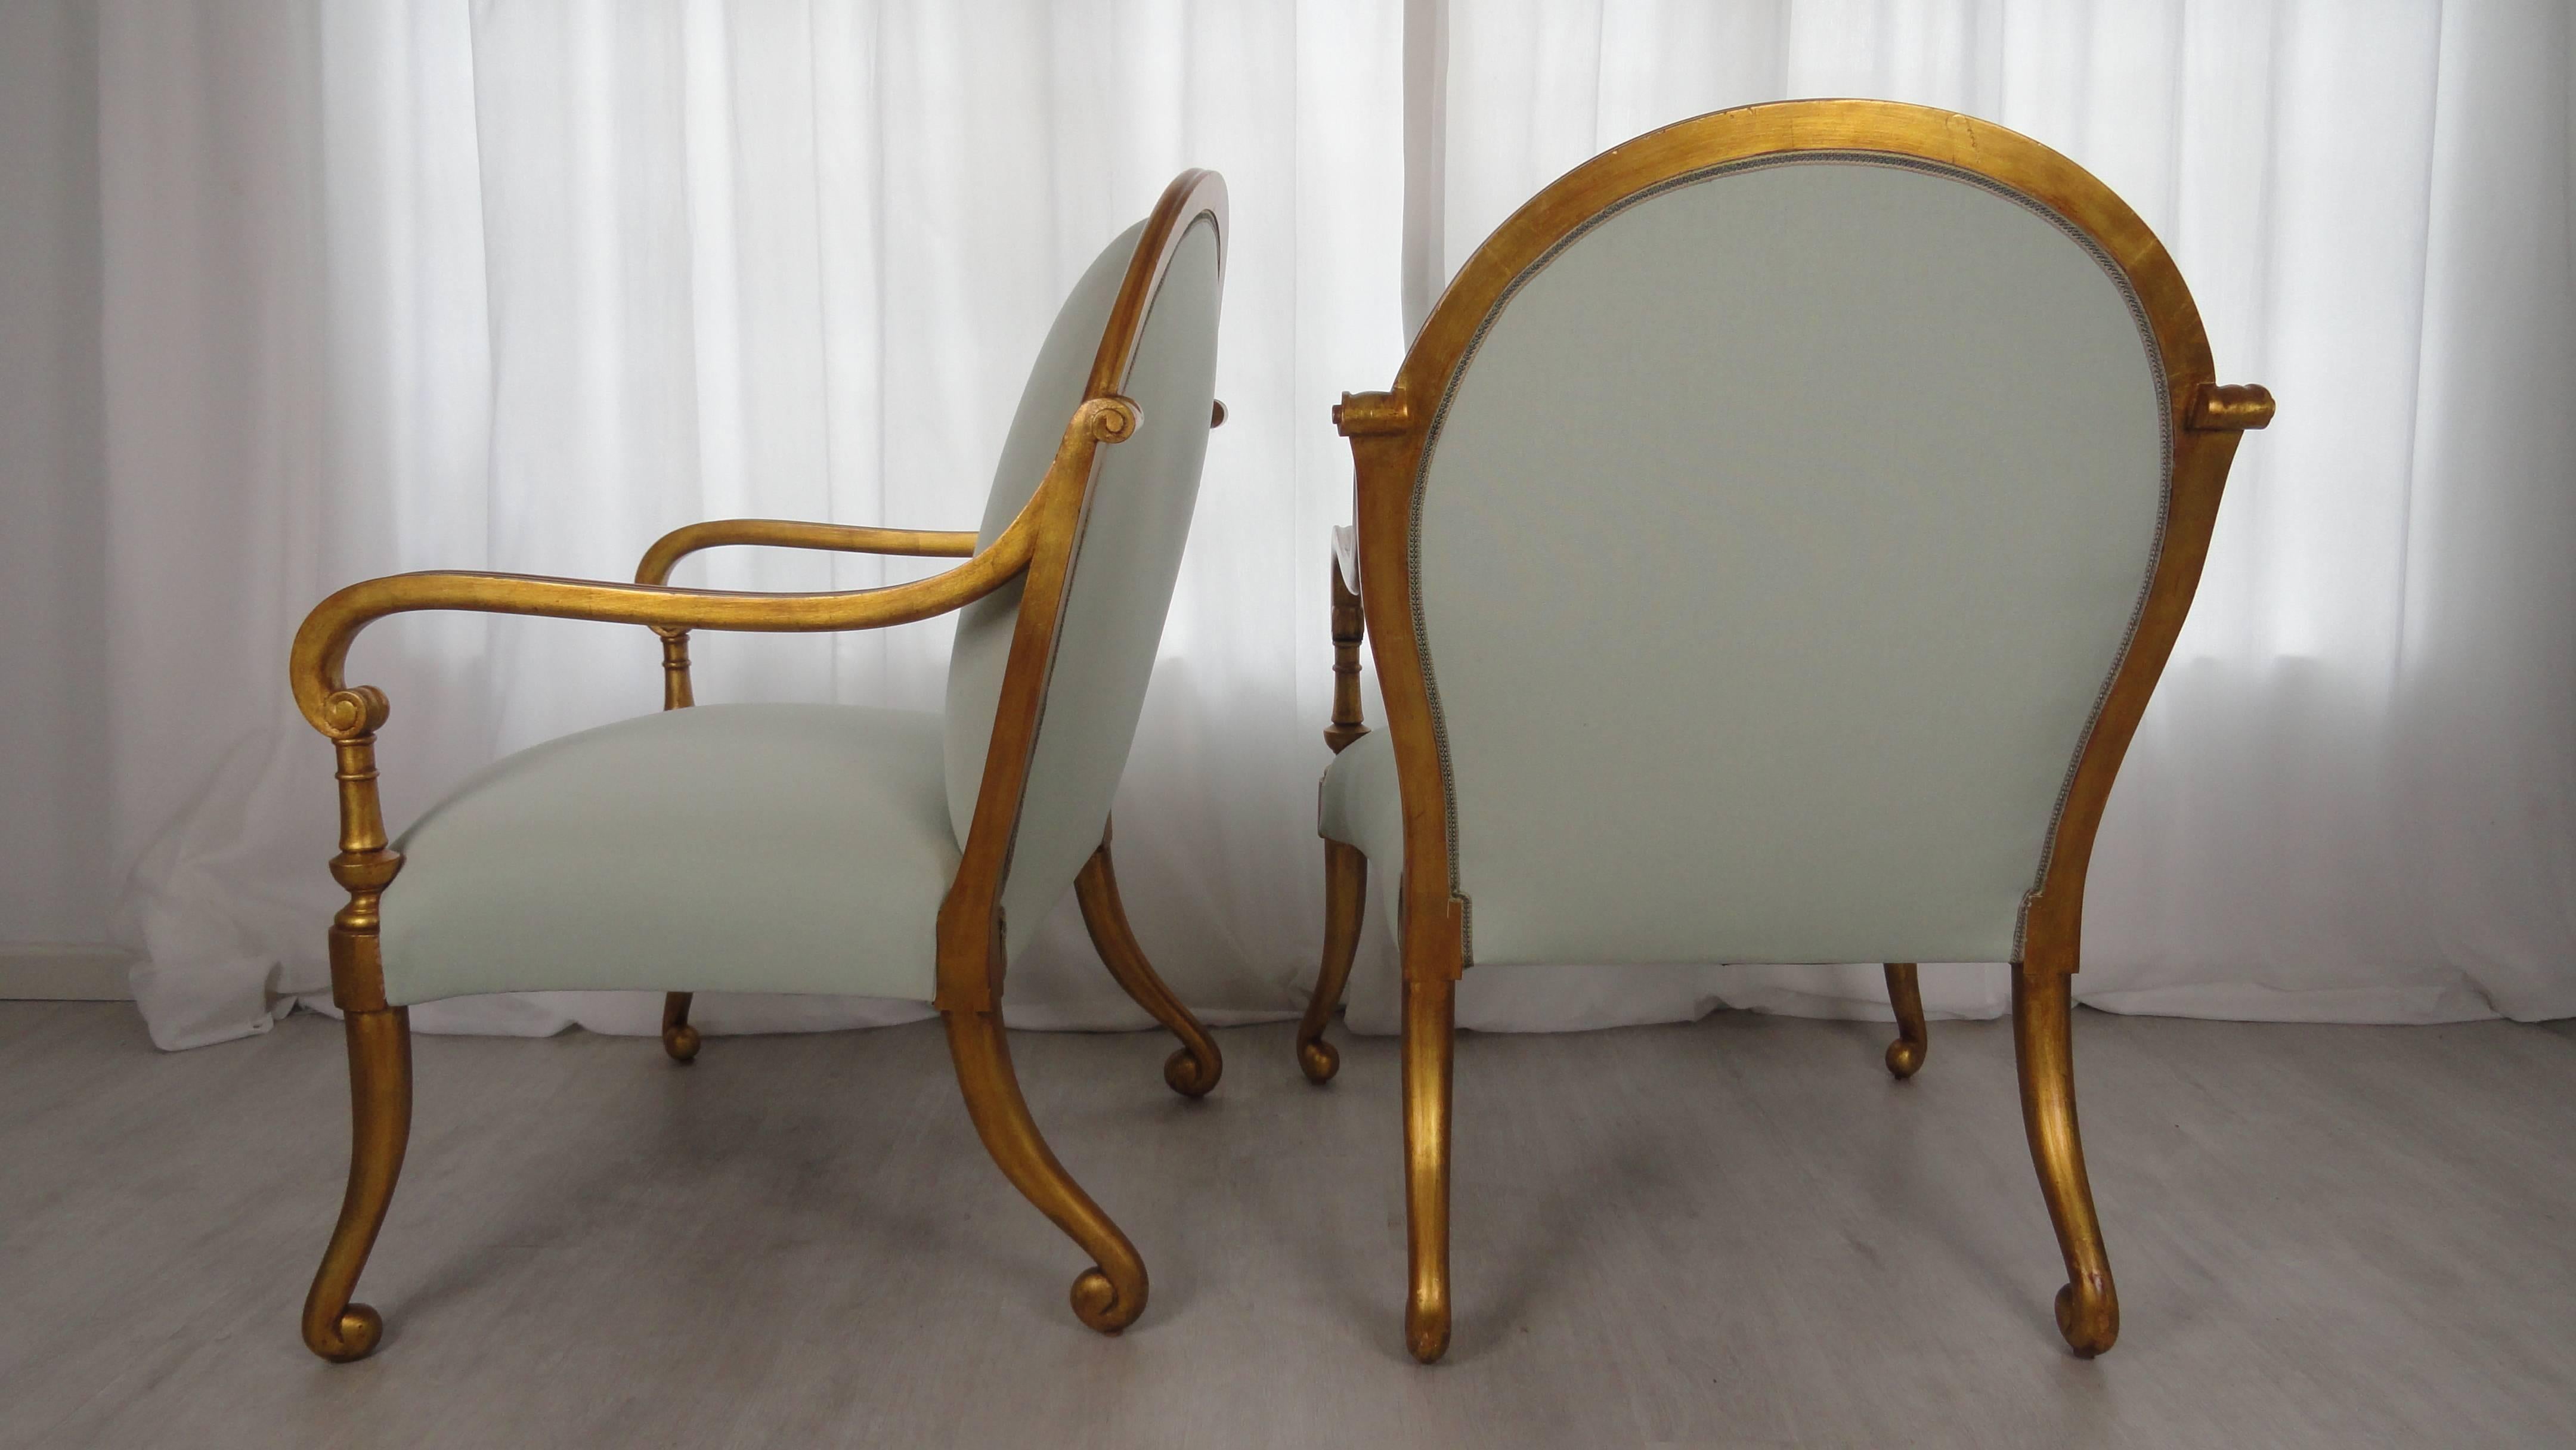 Pair of Rose Tarlow Melrose House Verona armchairs. Large-scale armchairs with tight seat and back. All hand-carved frame covered in 22-carat gold. Chairs have been upholstered in Holly Hunt indoor/outdoor celadon. Excellent condition.